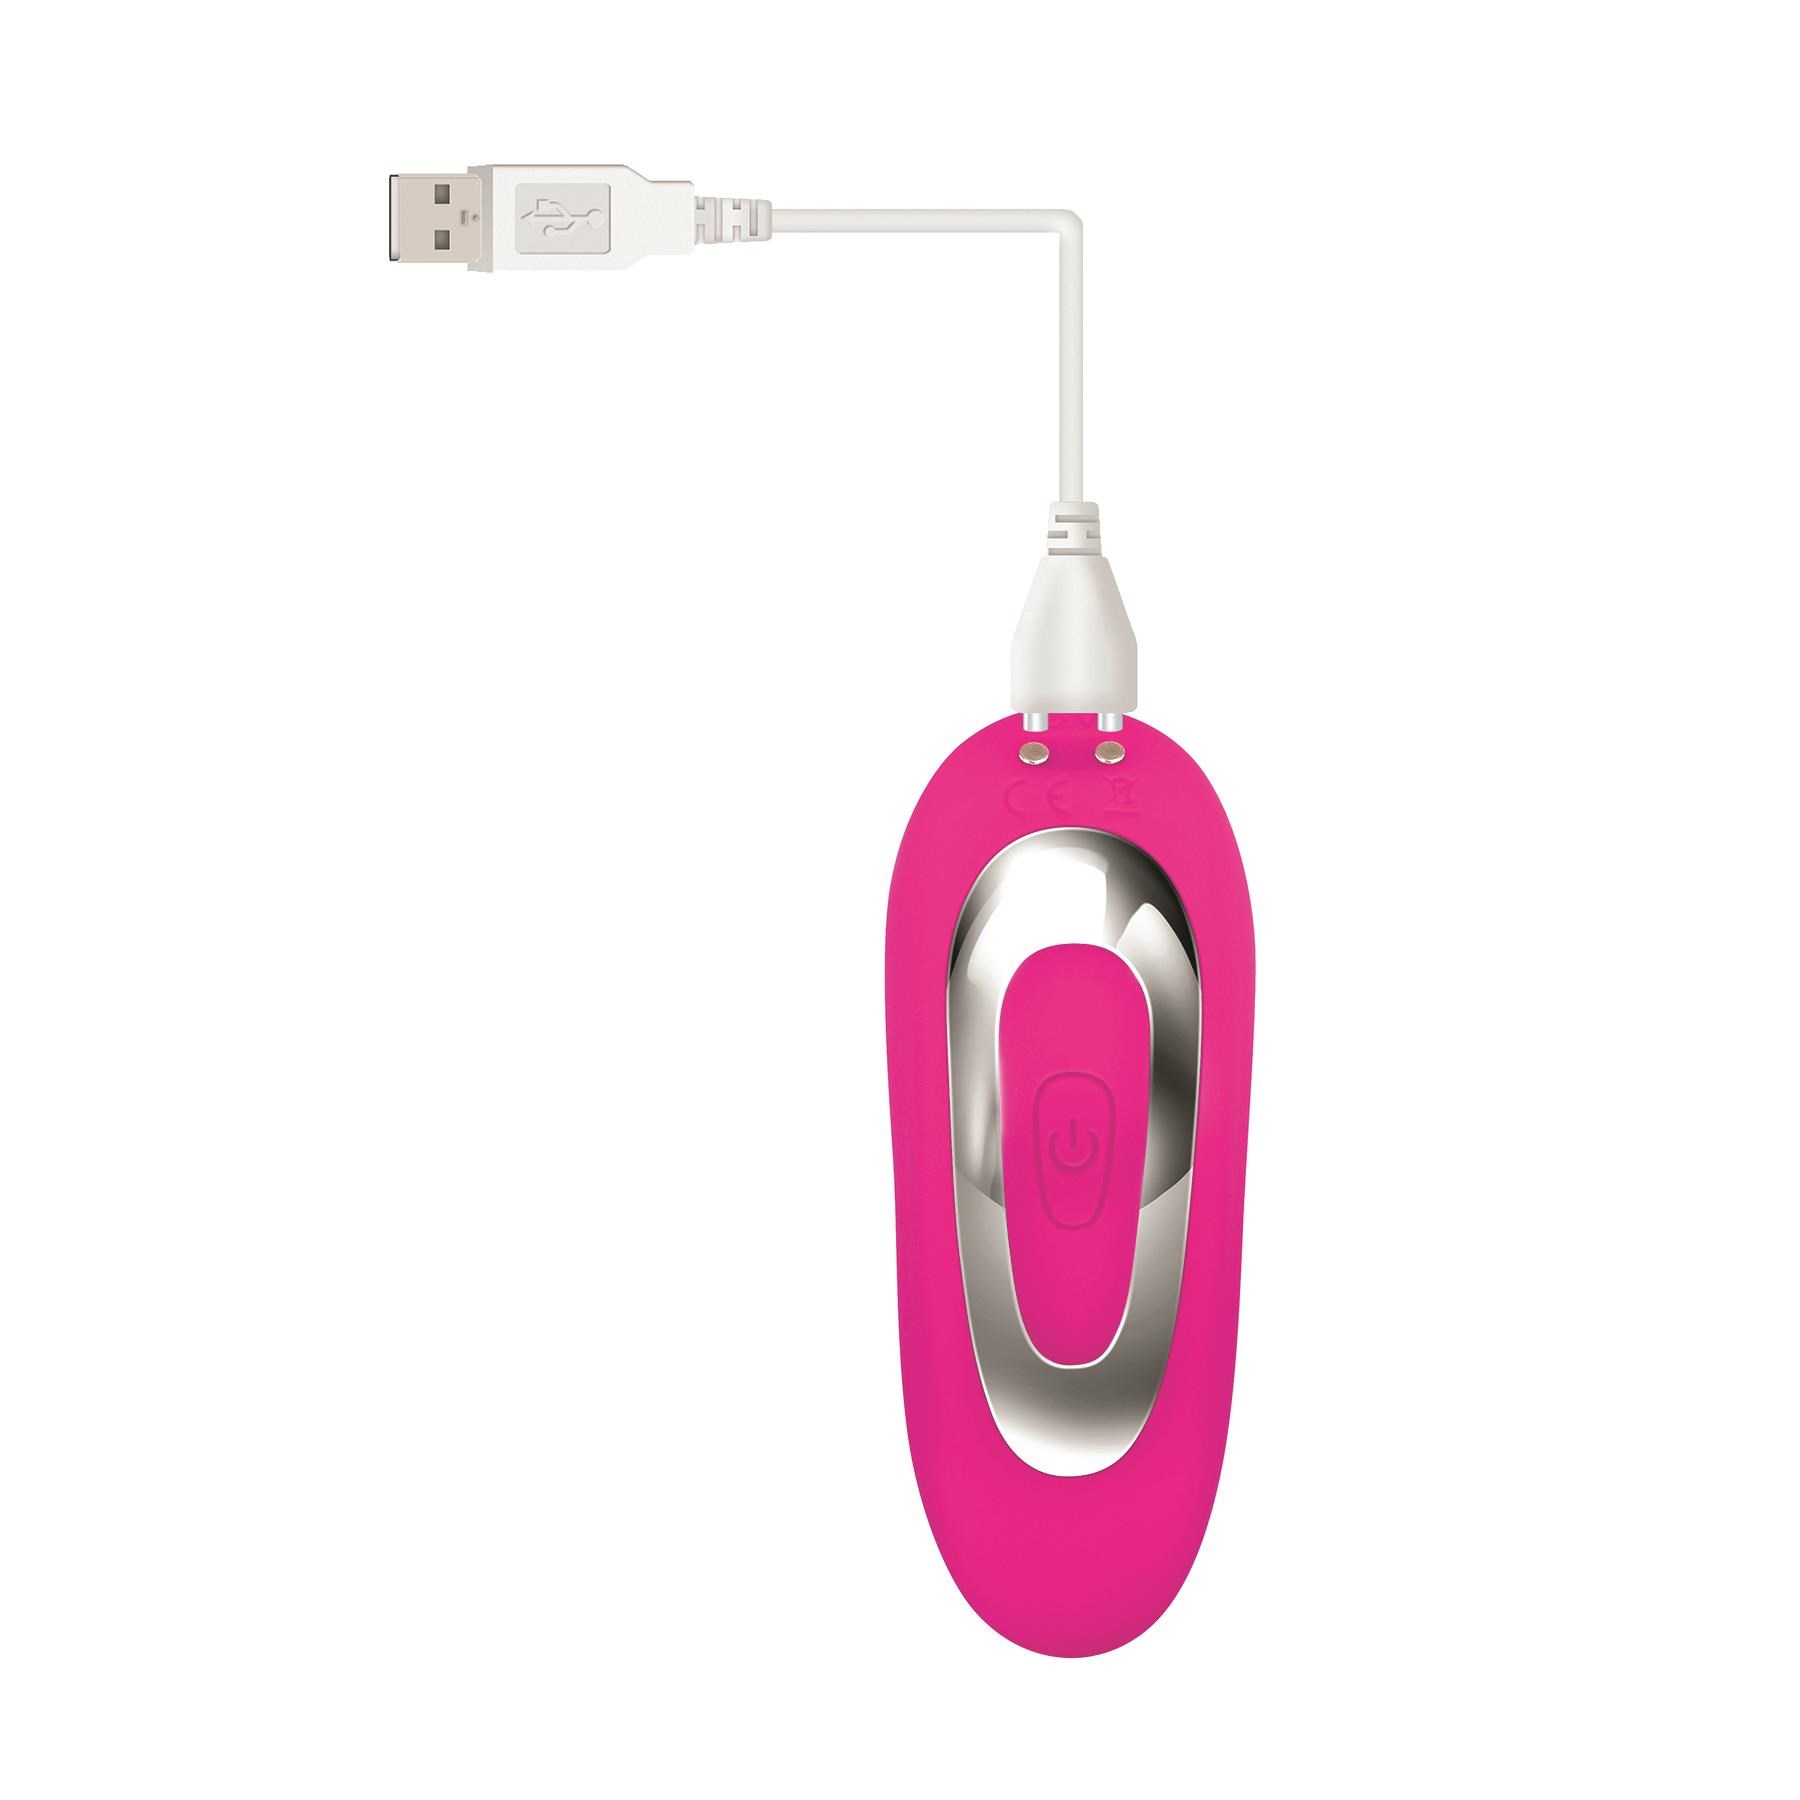 Adam & Eve Dual Entry Vibrator with Remote Control Showing Where Charger is Placed on Vibrator